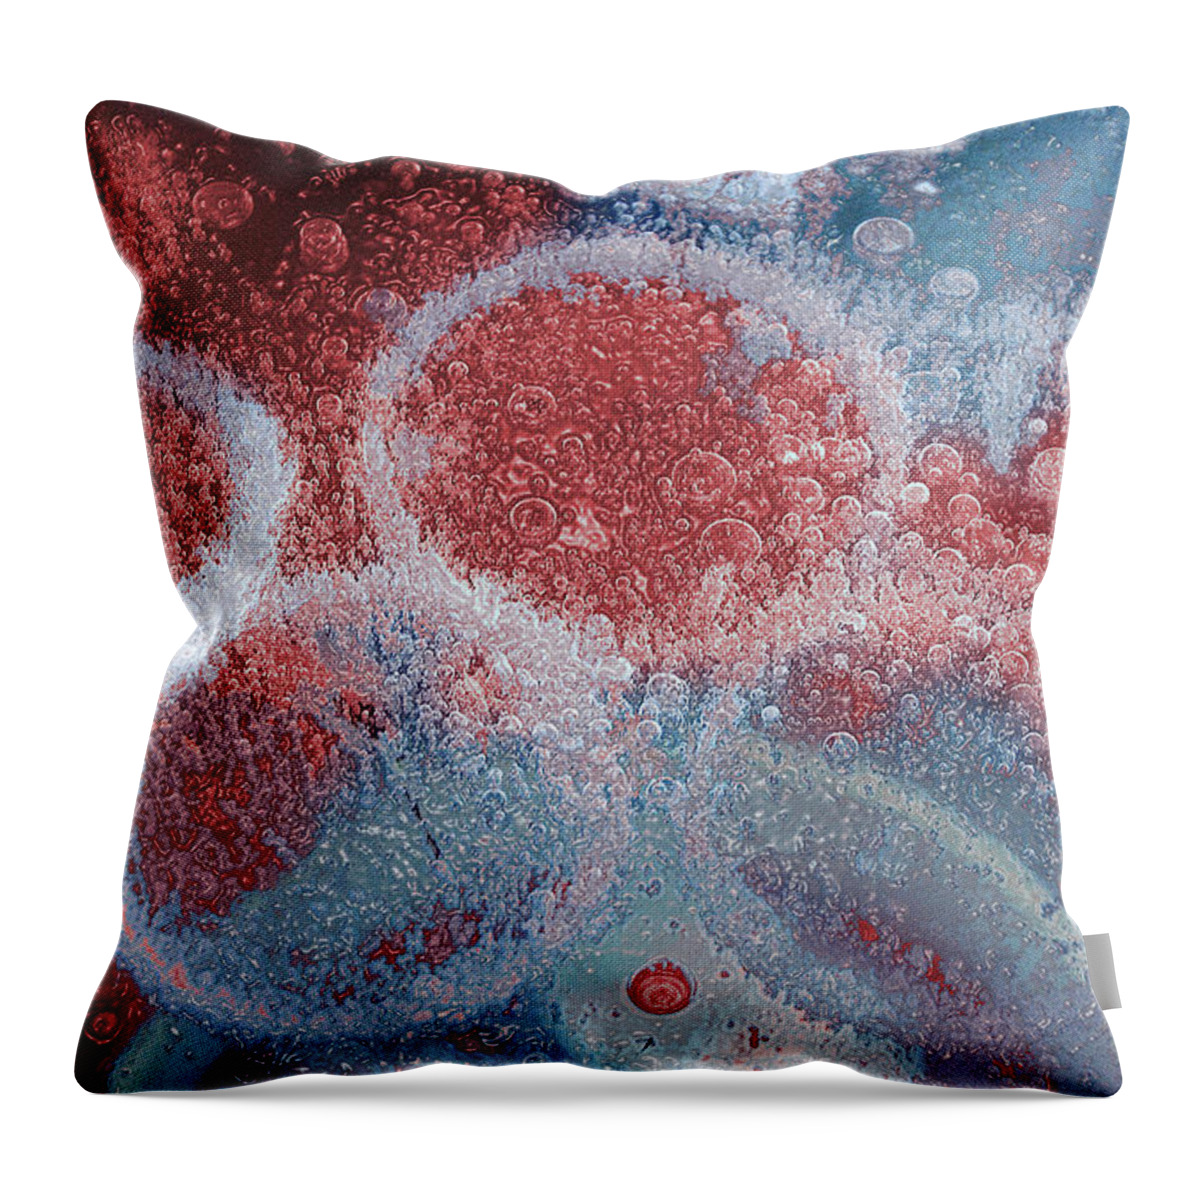 Bubbles Throw Pillow featuring the digital art Bubbles in Abstract by WAZgriffin Digital